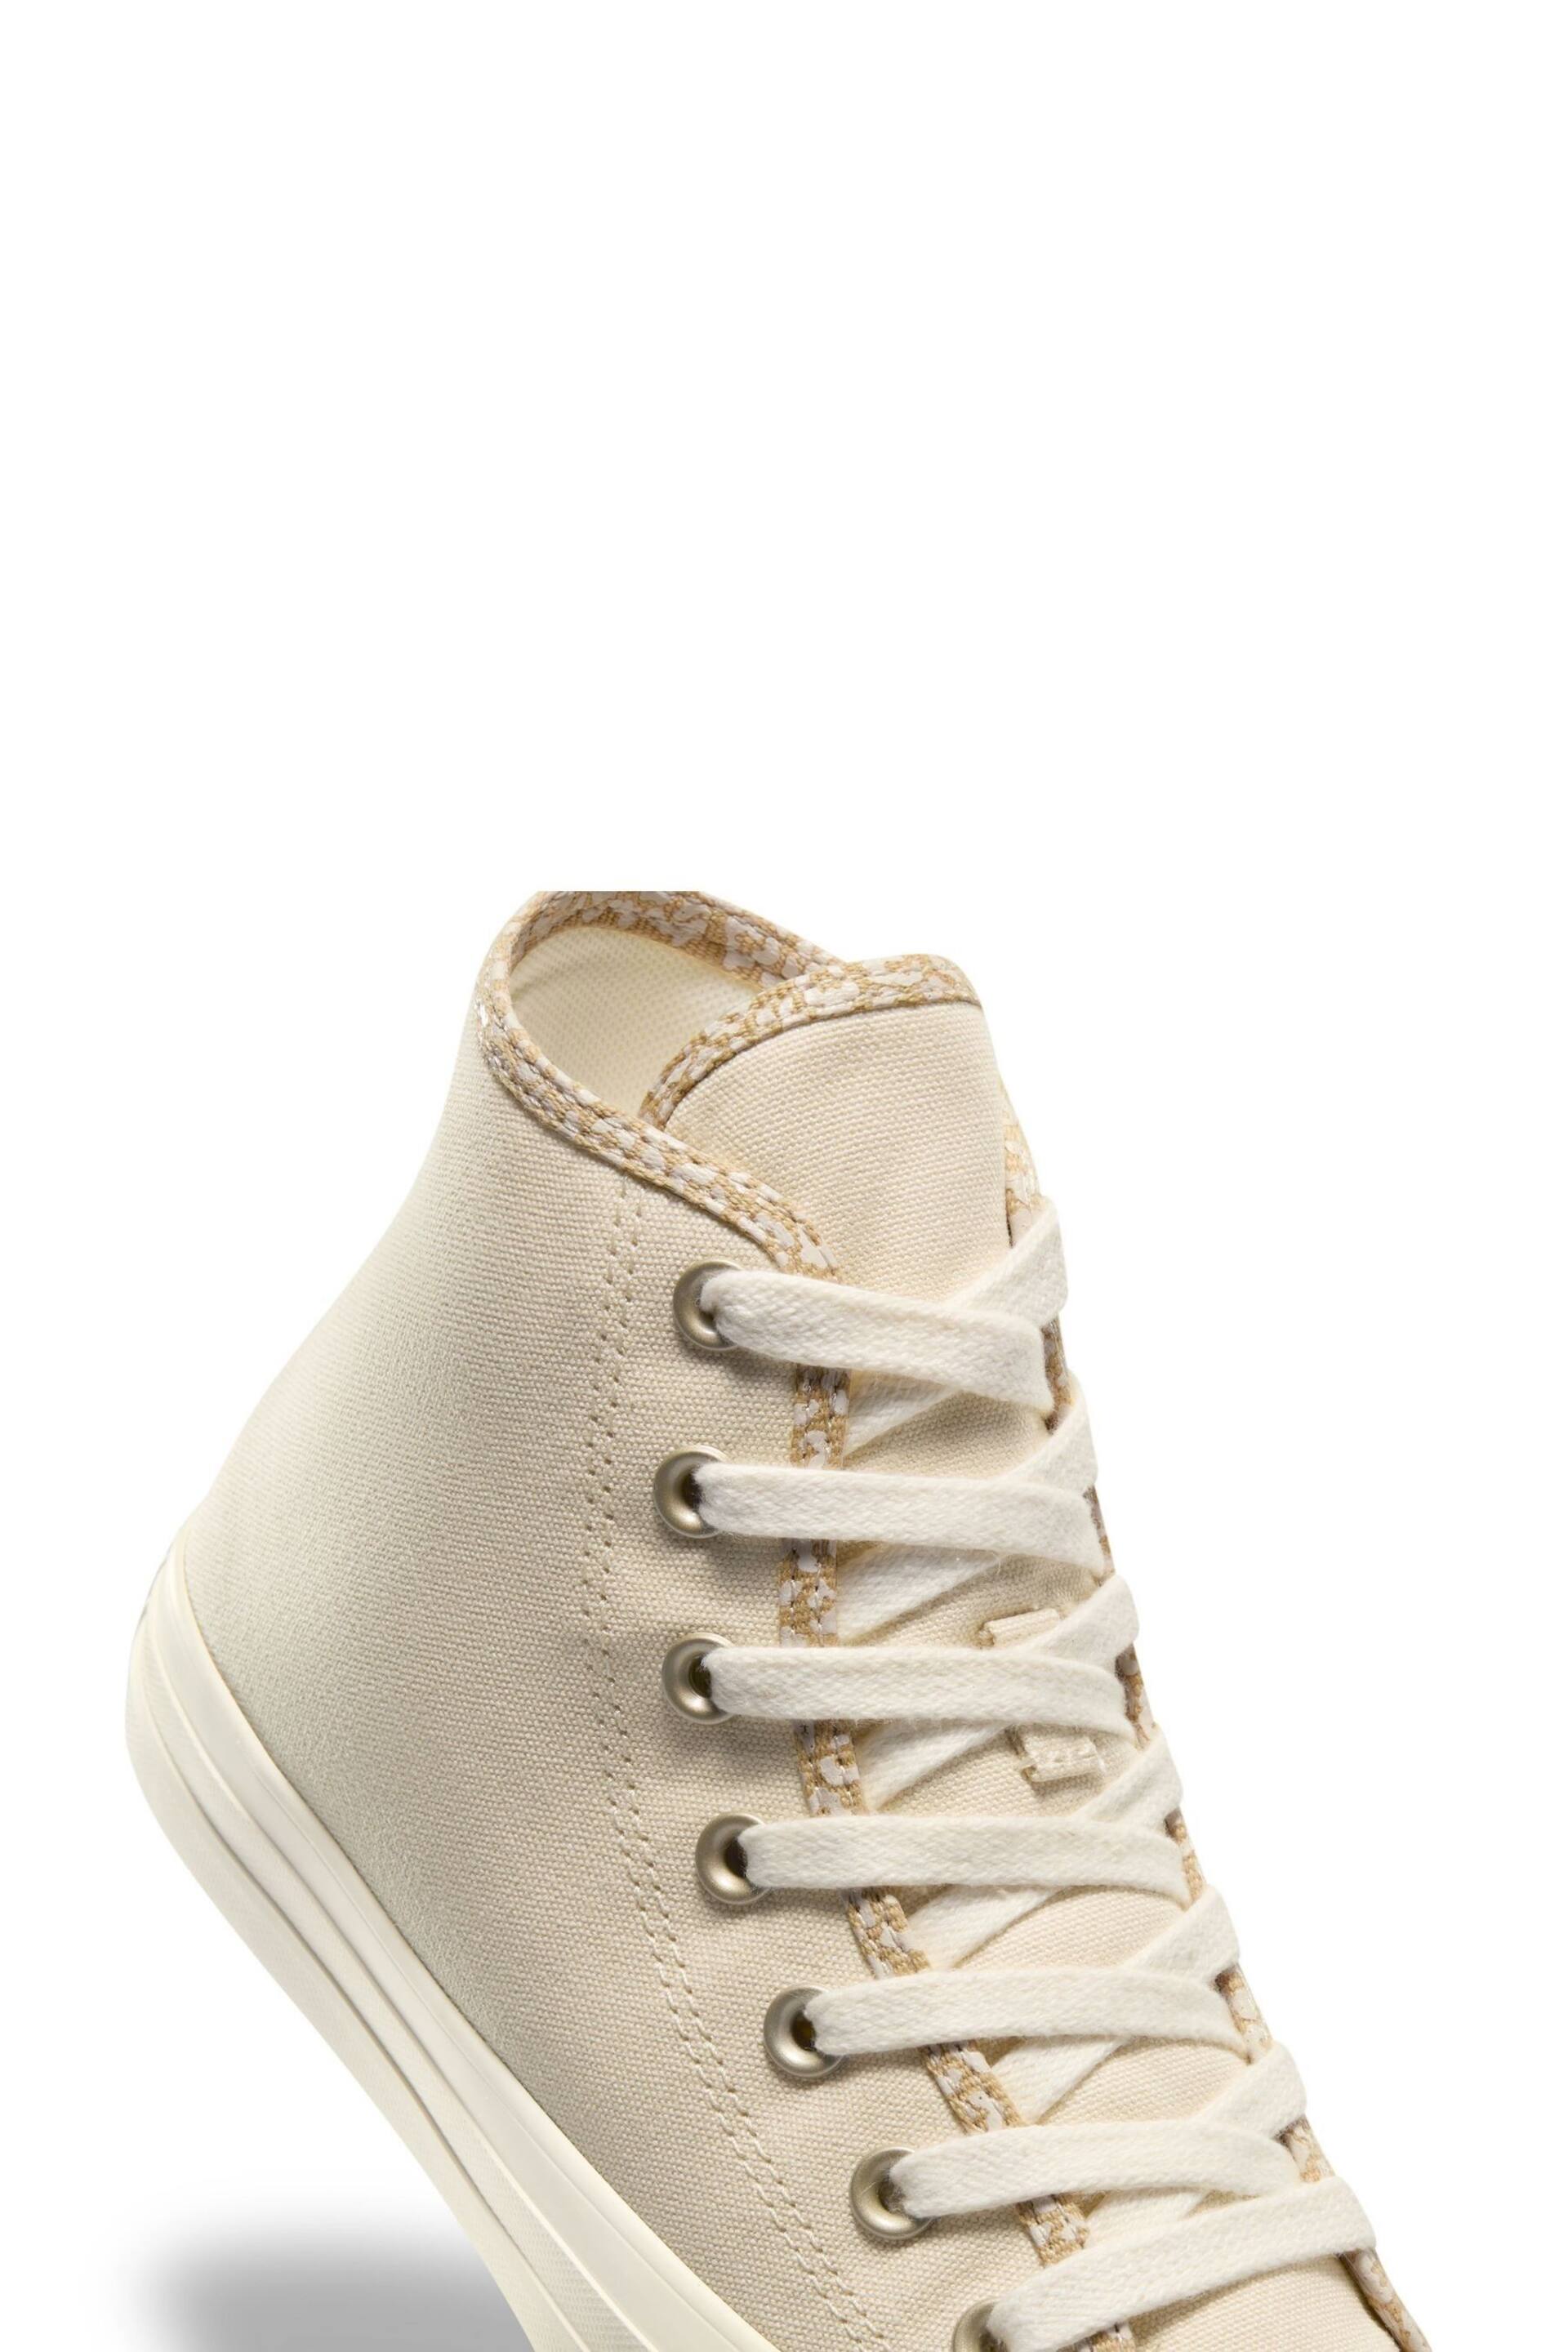 Converse Beige Chuck Taylor All Star High Top Trainers - Image 5 of 12